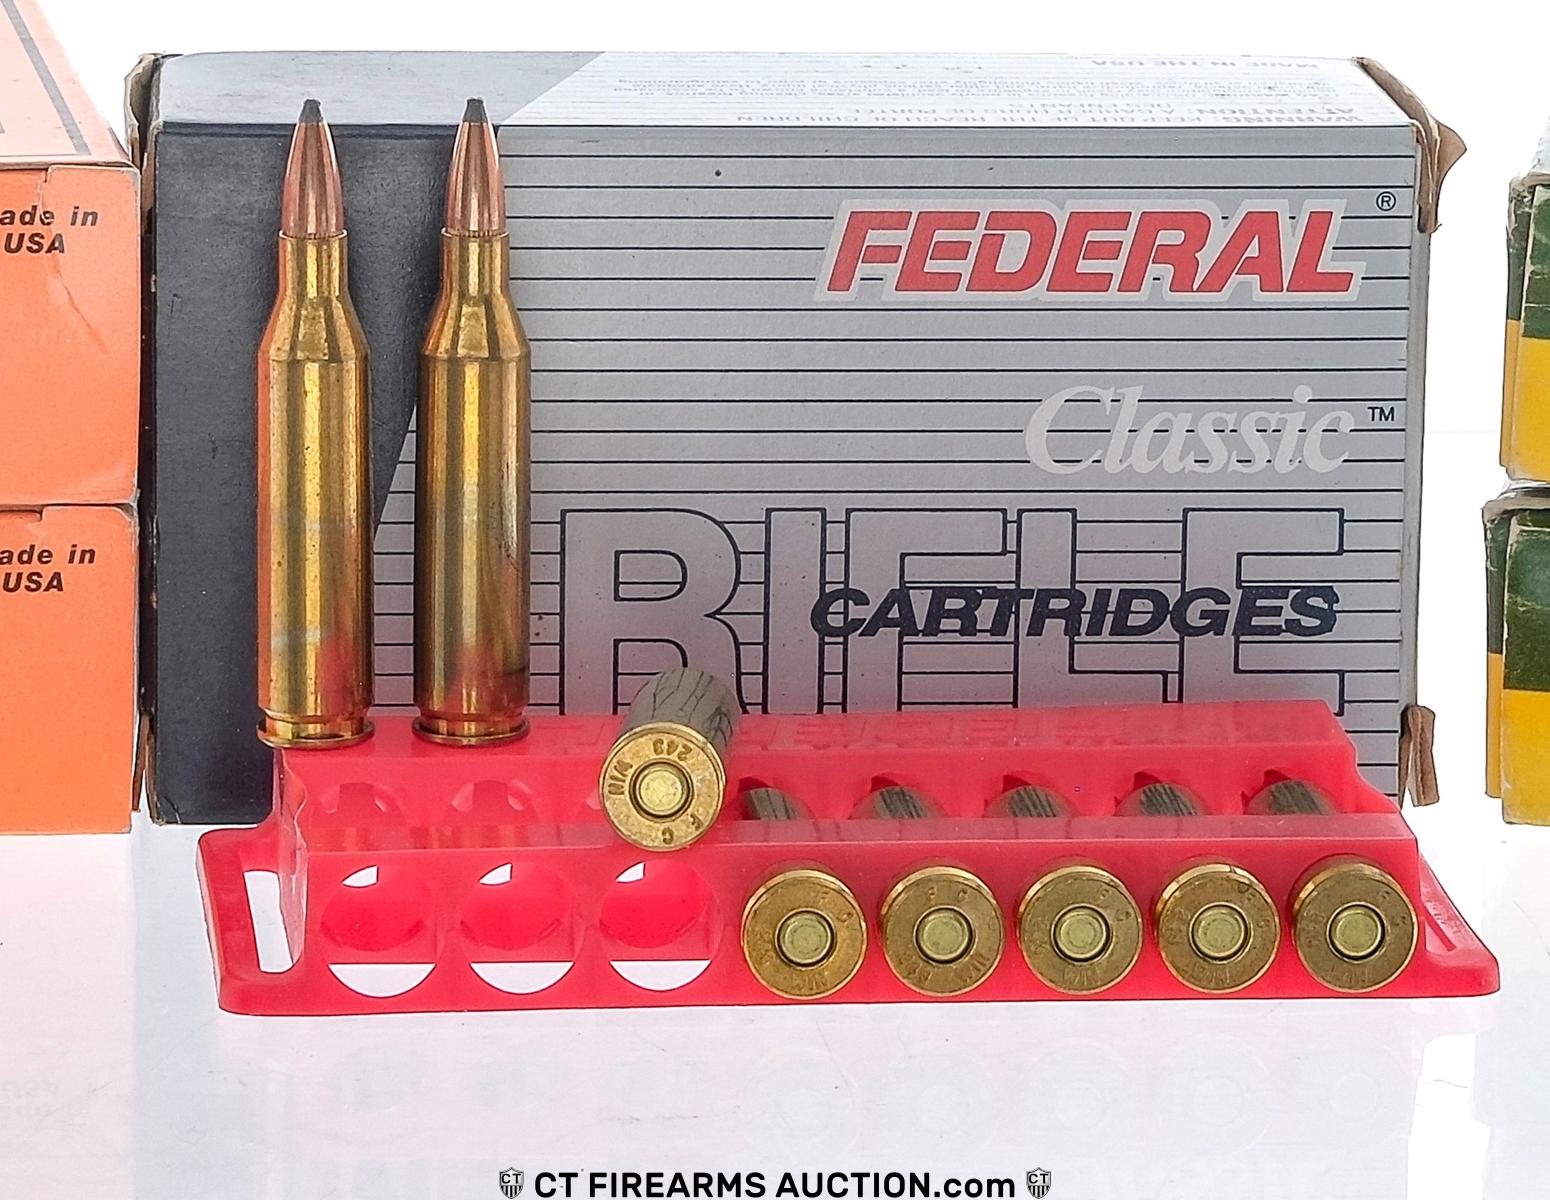 .243 Win. Ammo Lot 84 Live Rounds